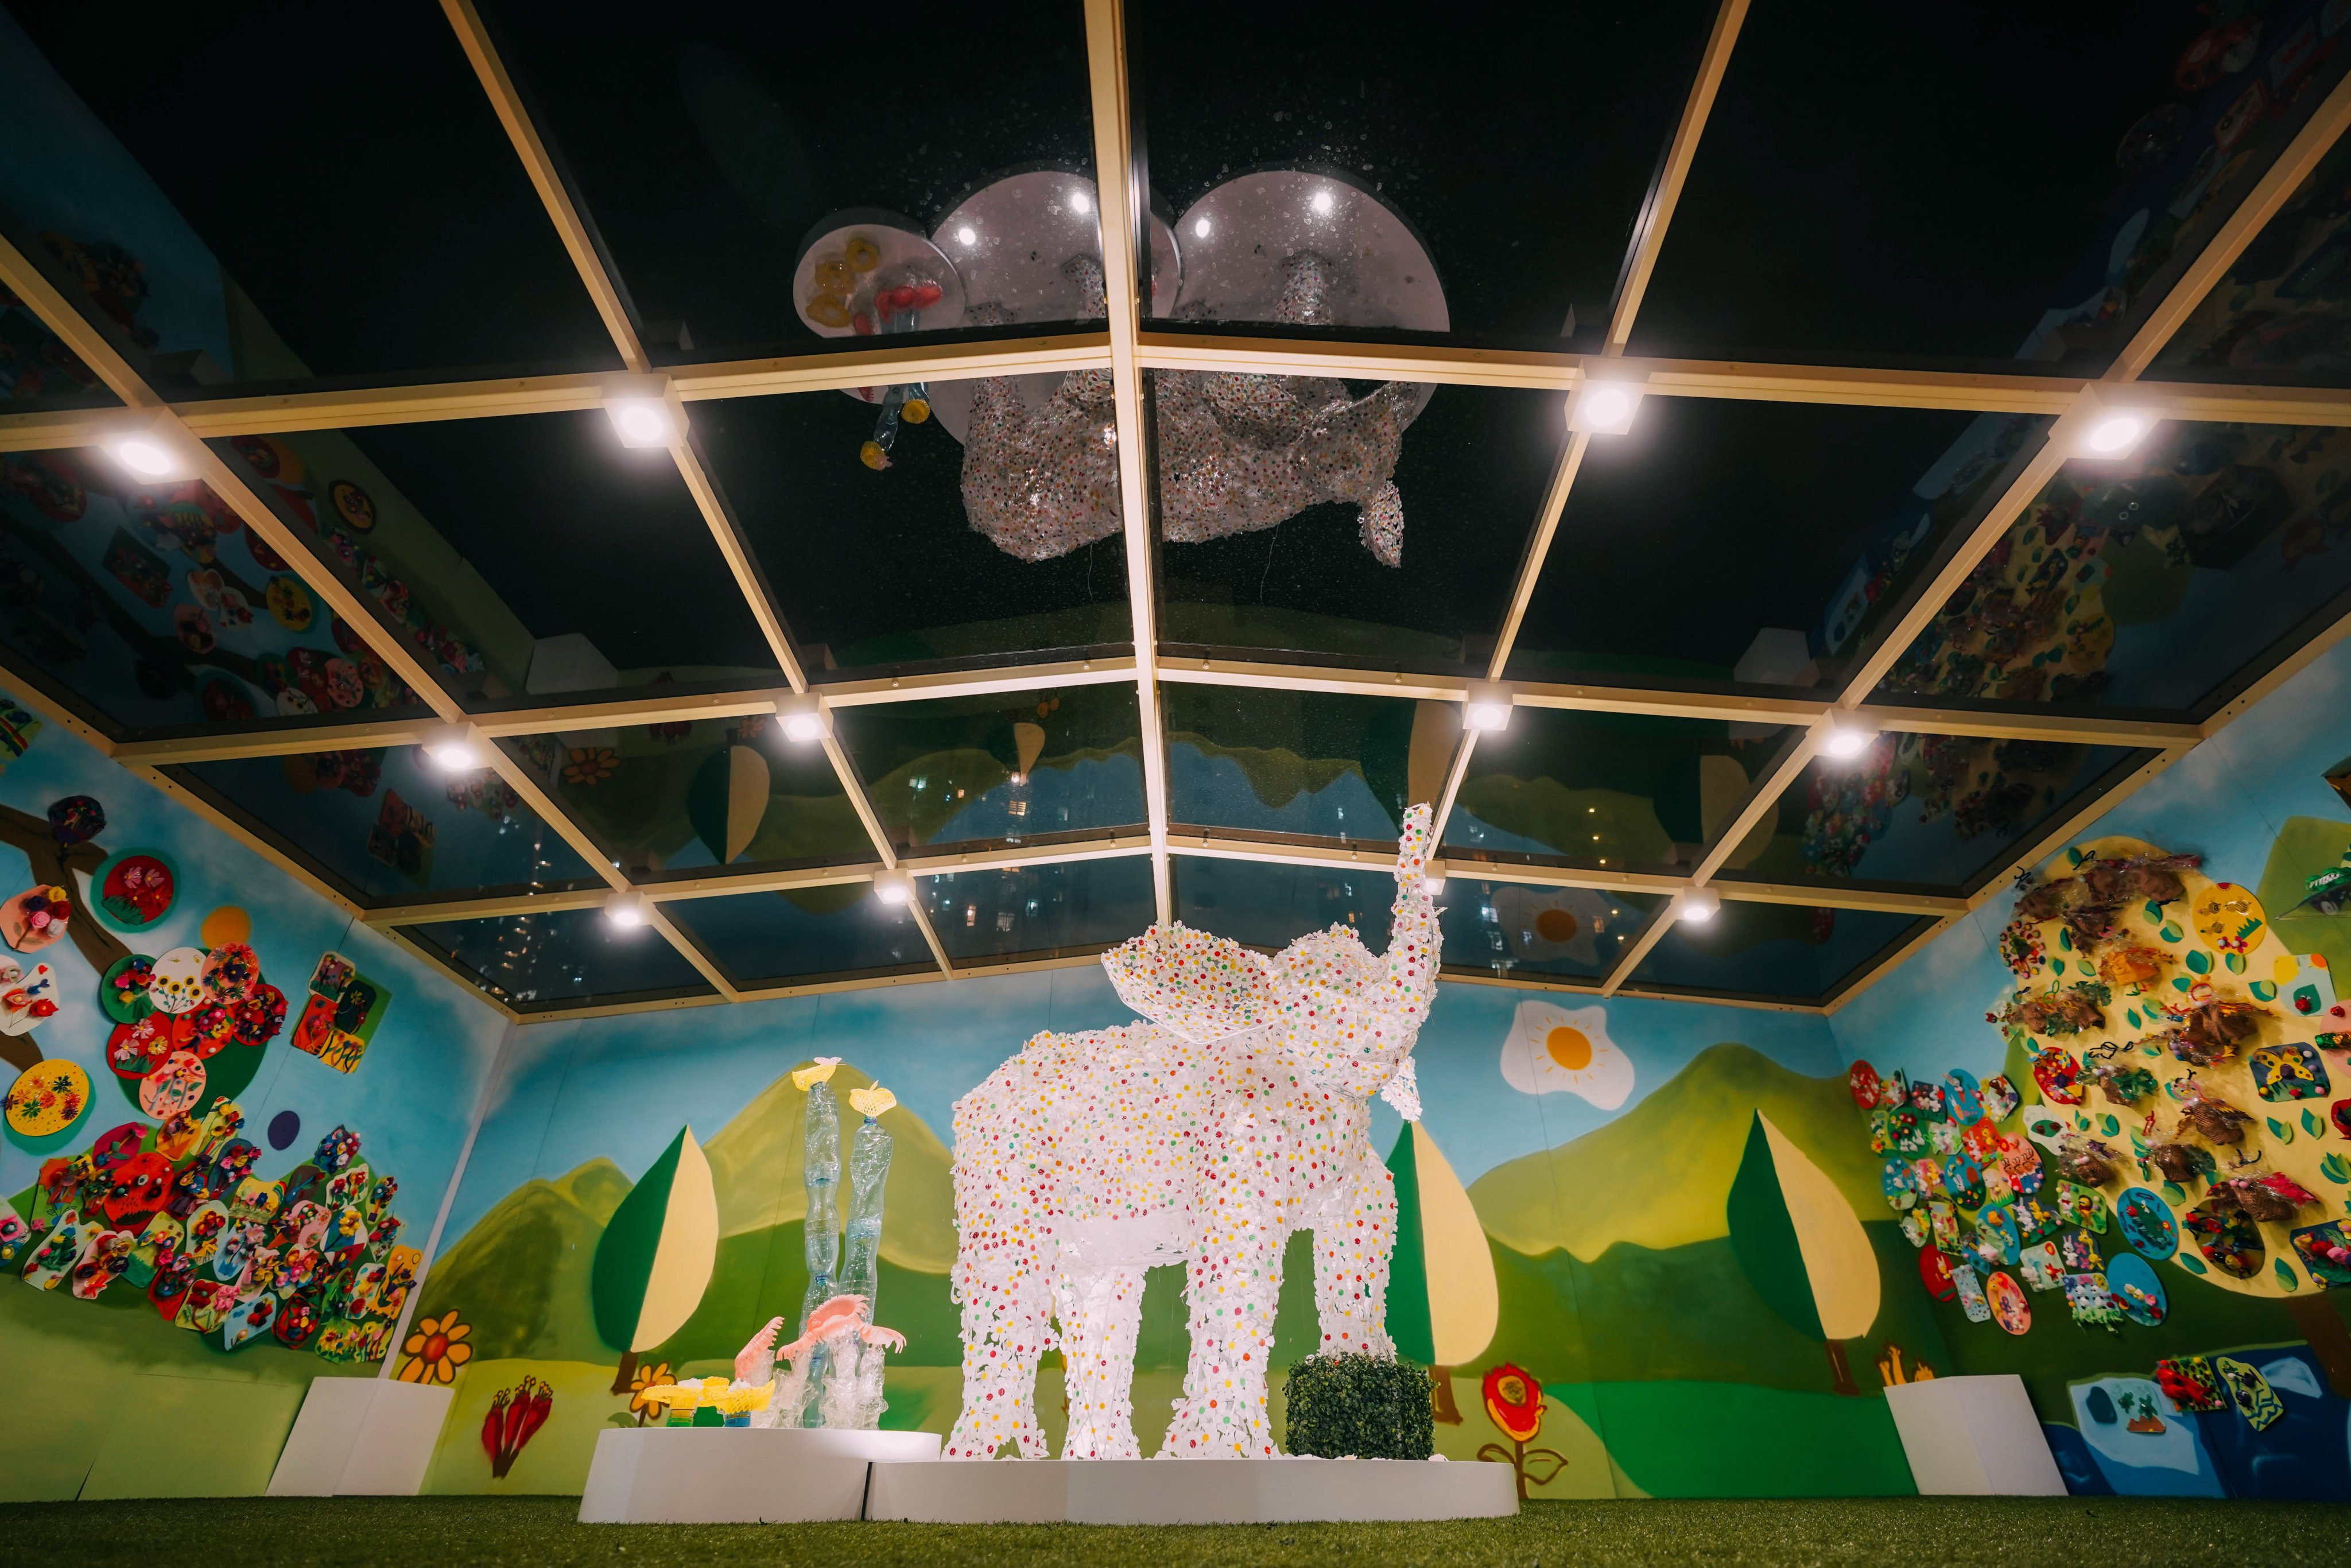 Artist Agnes Pang’s elephant made from used plastic egg boxes is shown together with eco-art creations by local students at the Tze Wan Shan Shopping Centre